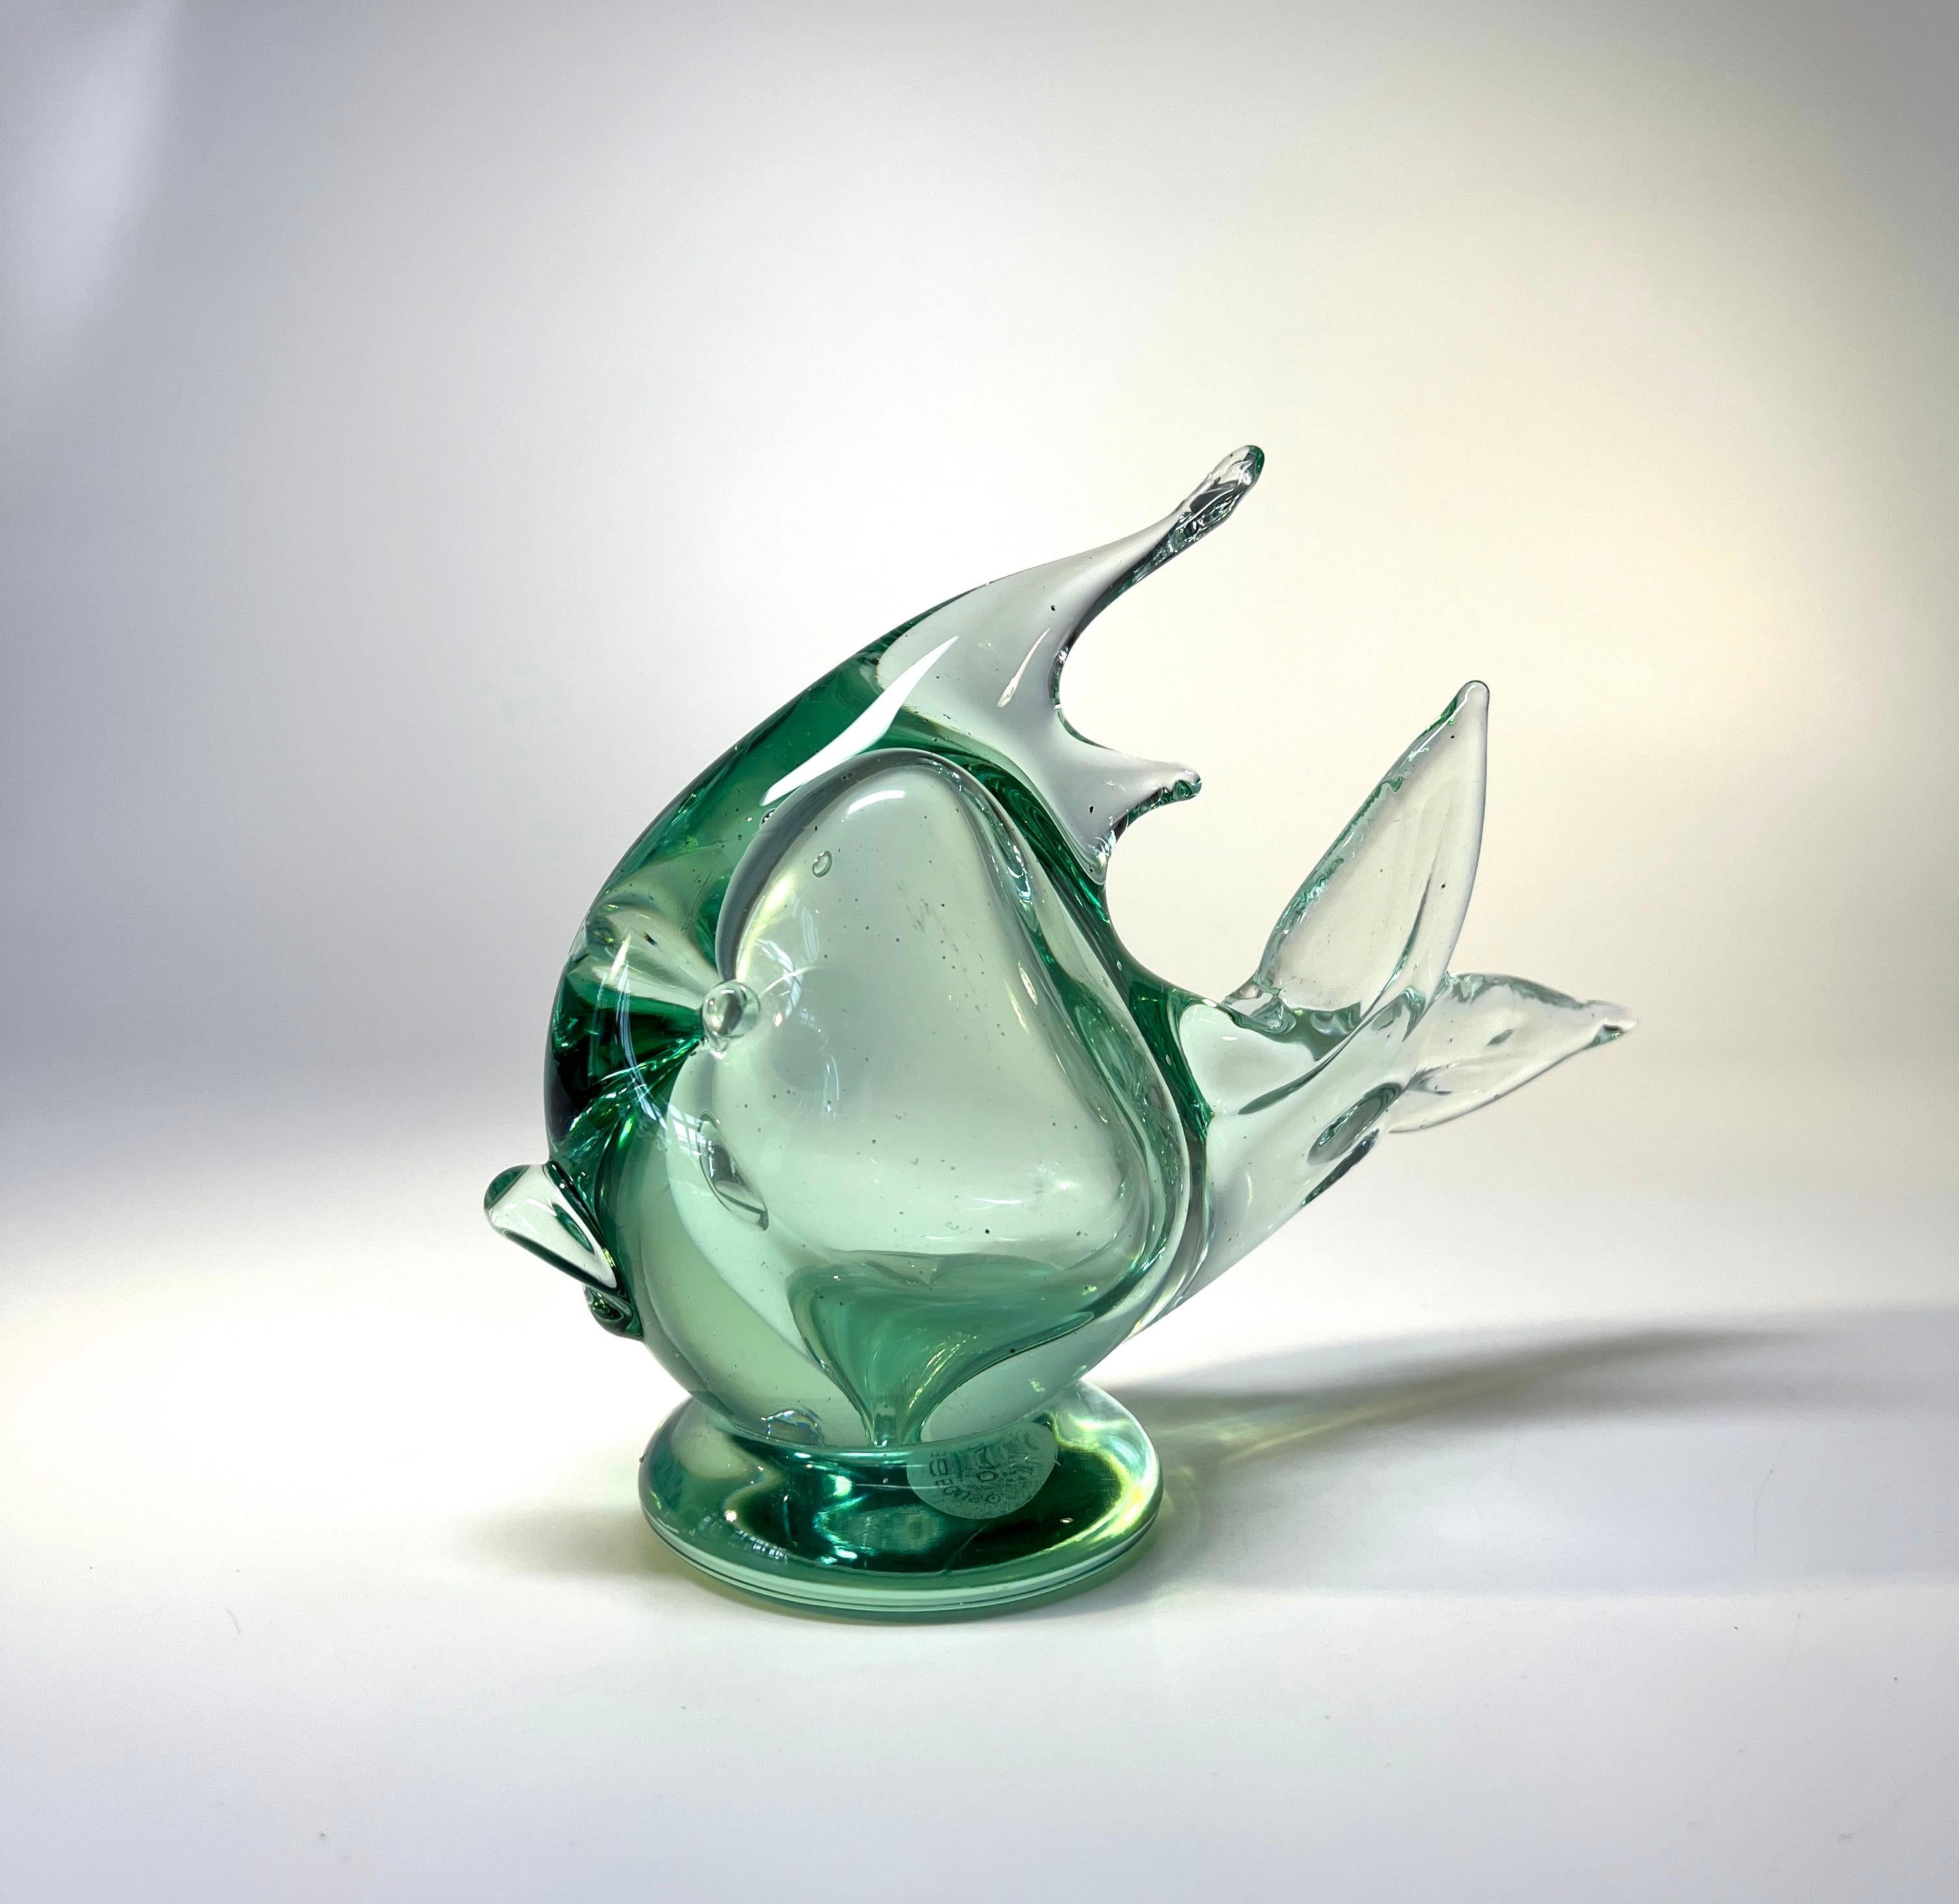 Superbly crafted hand blown angel fish by Archimede Seguso, Murano, Italy 
Circa 1970's
Signed with original label on base
Height 4 inch,  Width 2.25 inch, Depth 5.5inch
In very good condition
Wear consistent with age and use